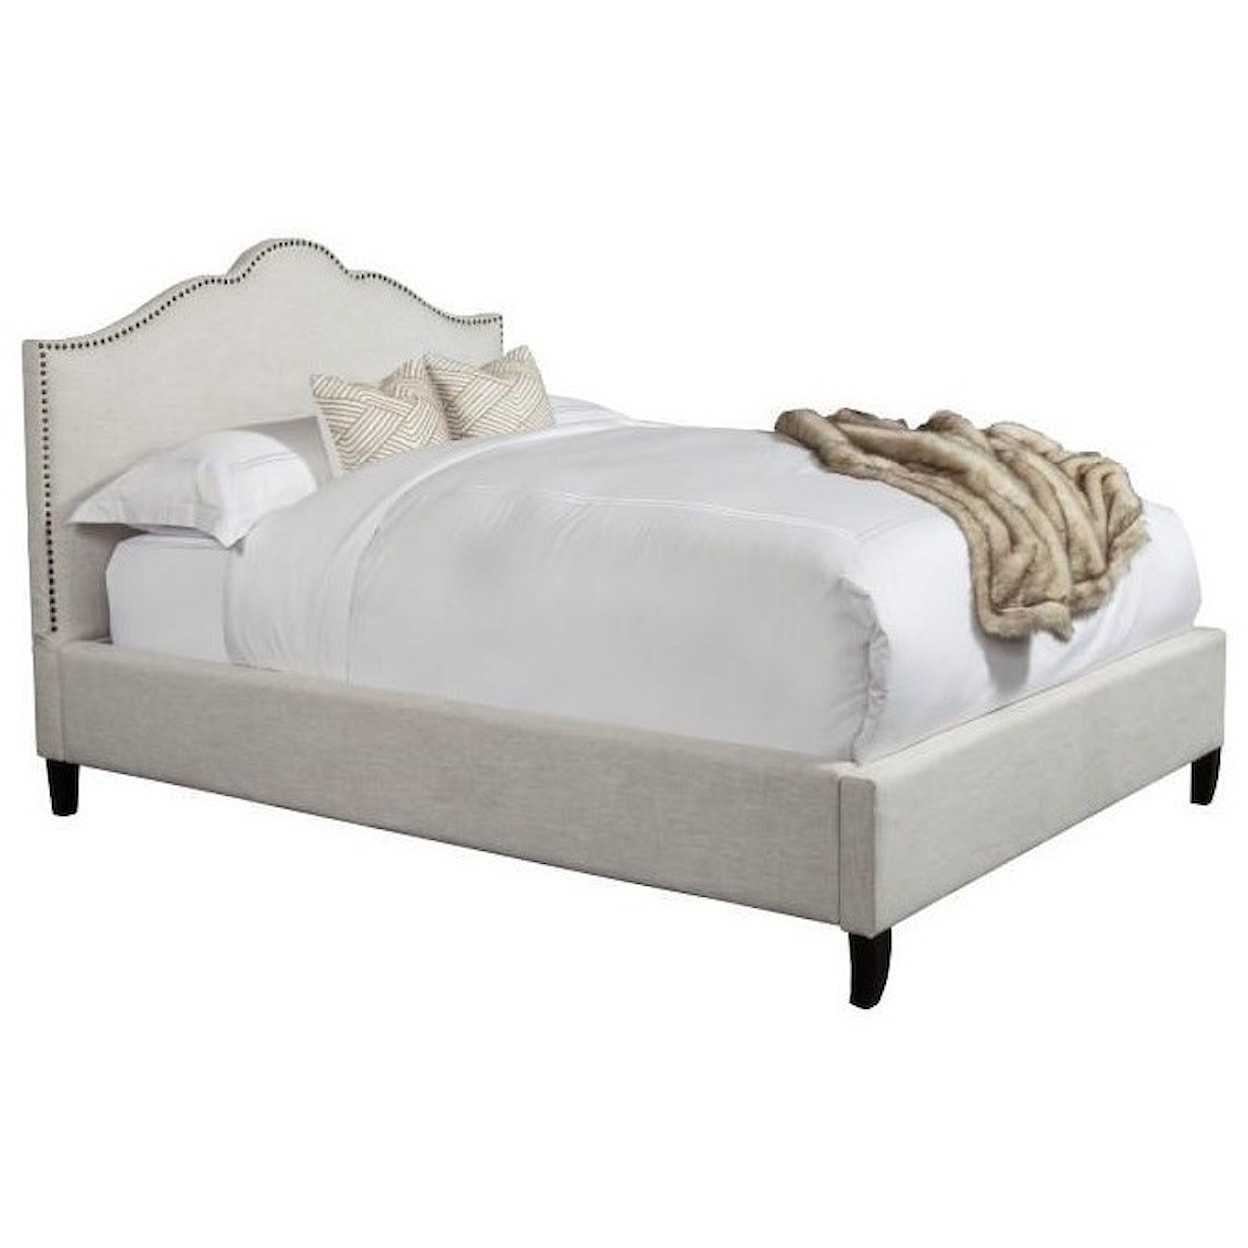 Paramount Living Jamie King Upholstered Bed